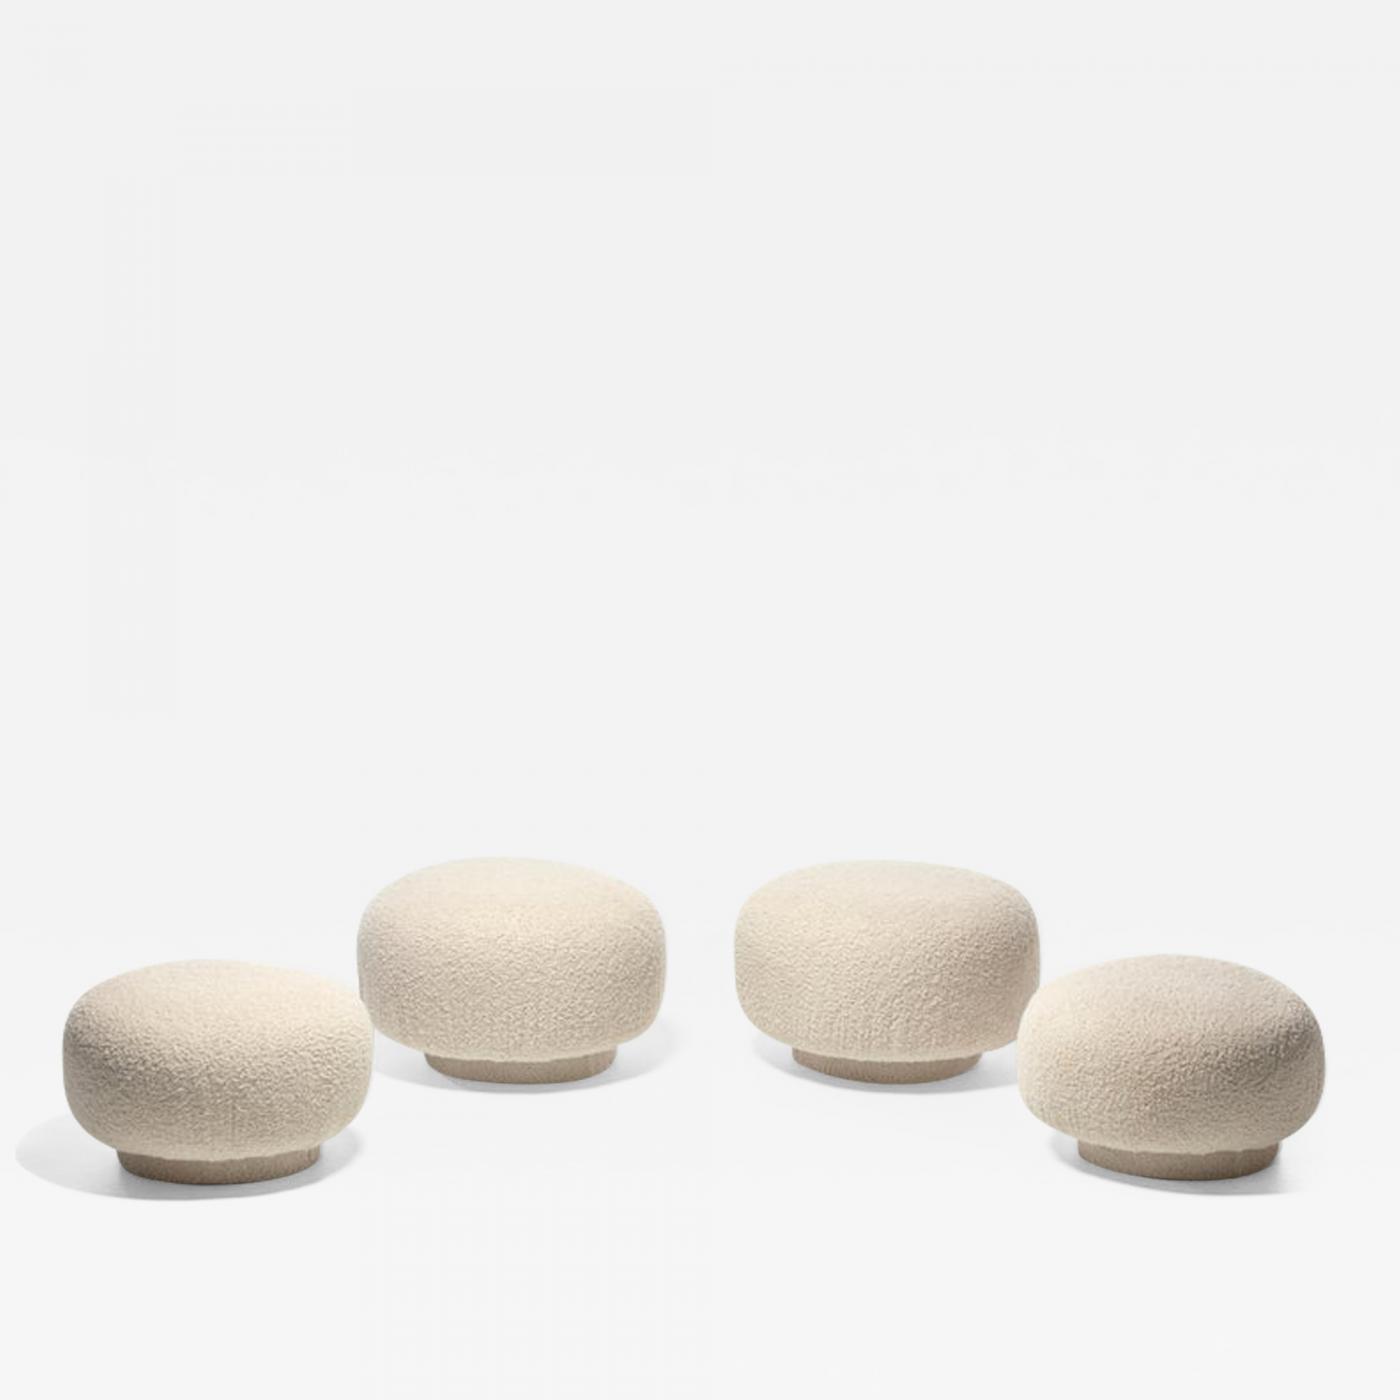 https://cdn.incollect.com/sites/default/files/zoom/Mushroom-Swivel-Top-Post-Modern-Style-Ottoman-Pouf-in-Ivory-White-Boucl-535406-2459770.jpg